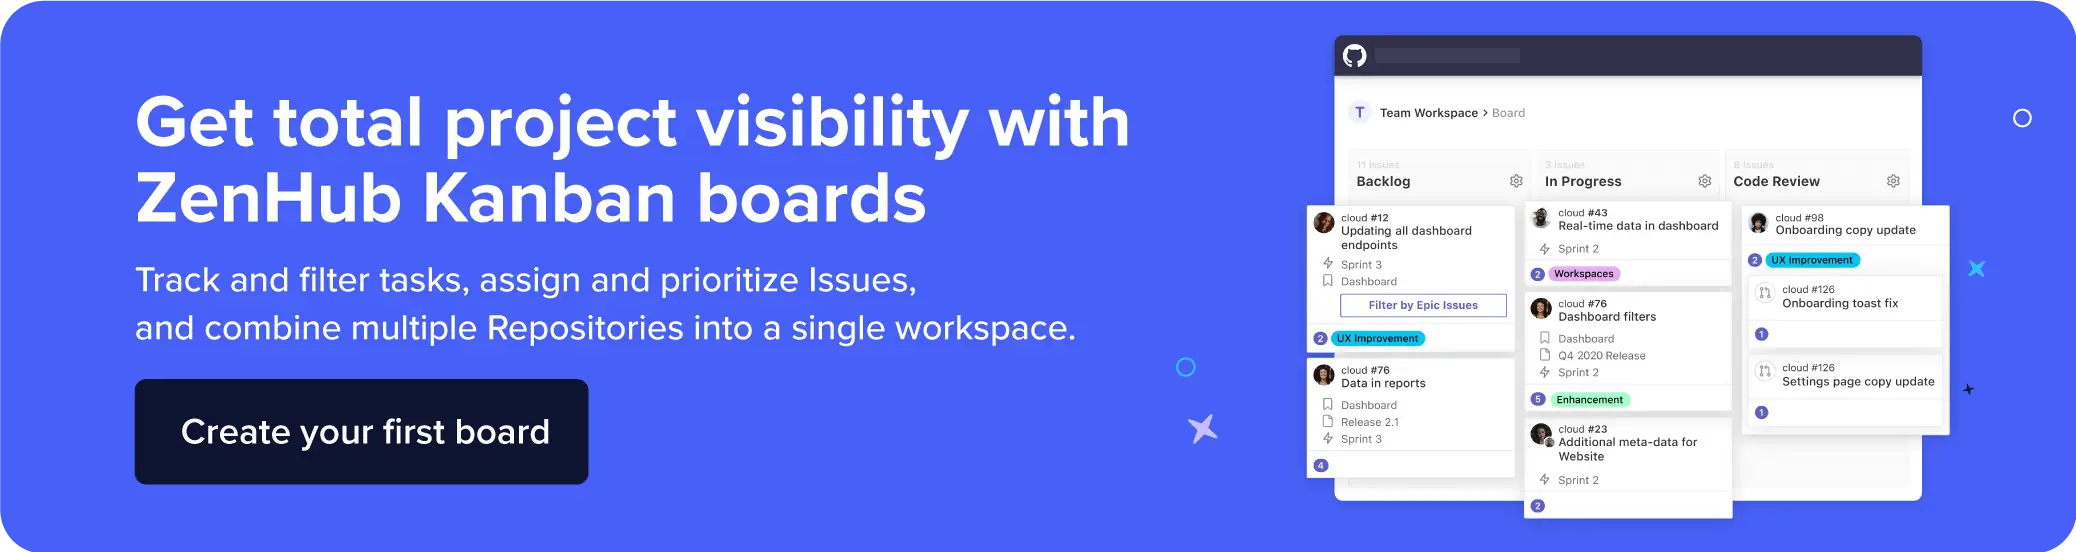 Suggests tracking and filtering tasks, prioritizing Issues, and combining multiple Repositories into a single workspace.